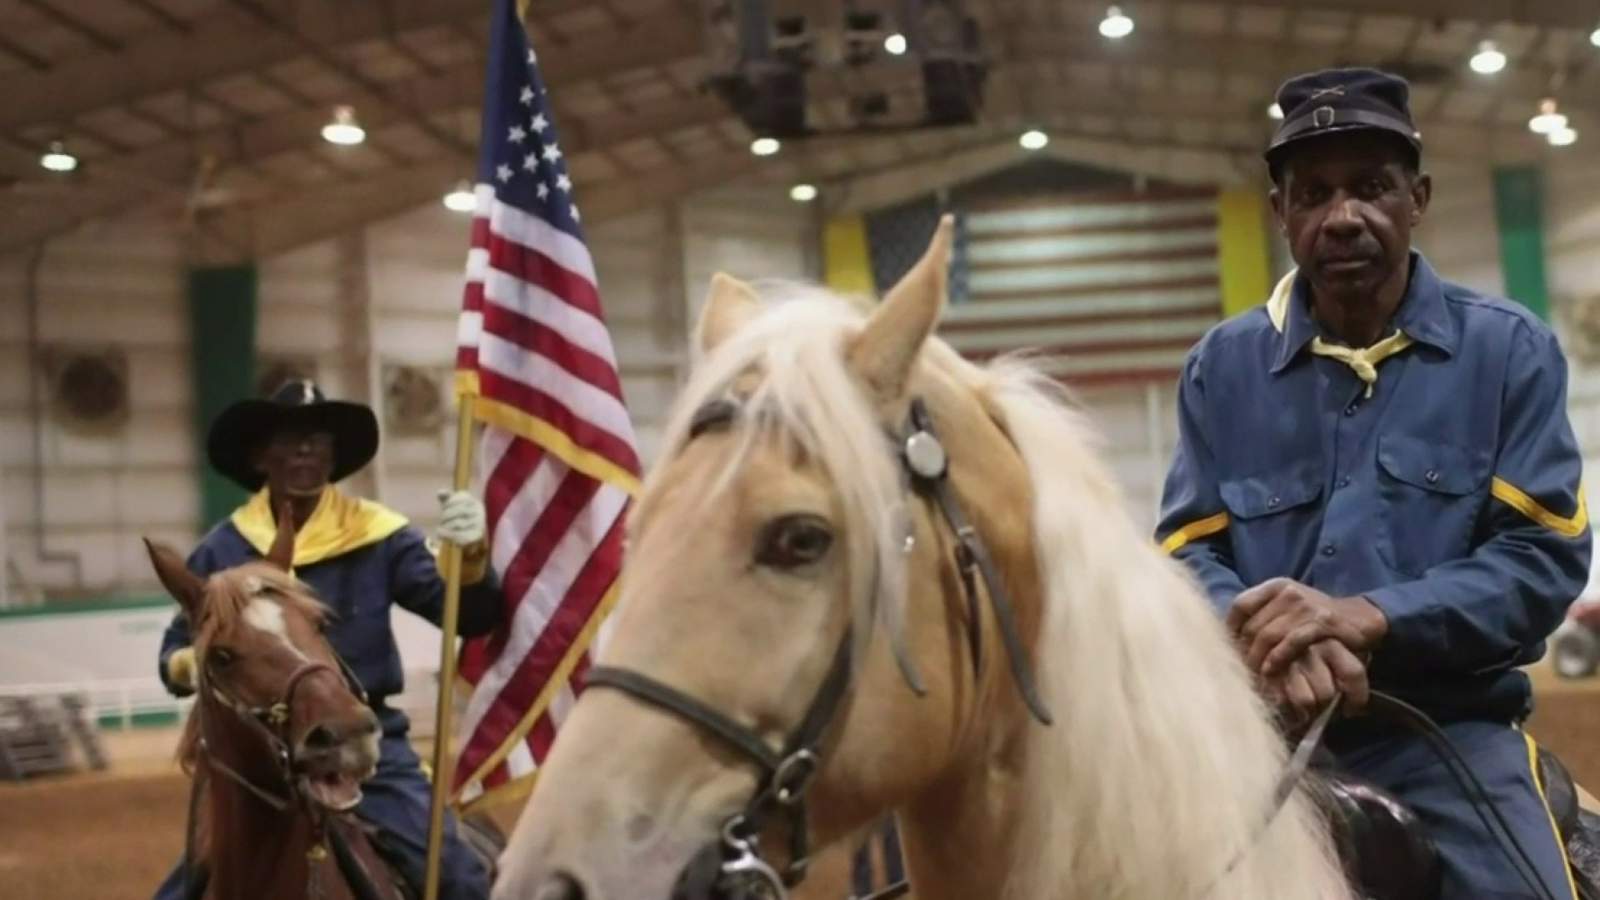 How group of men in Detroit honors Buffalo Soldiers, passes knowledge to kids